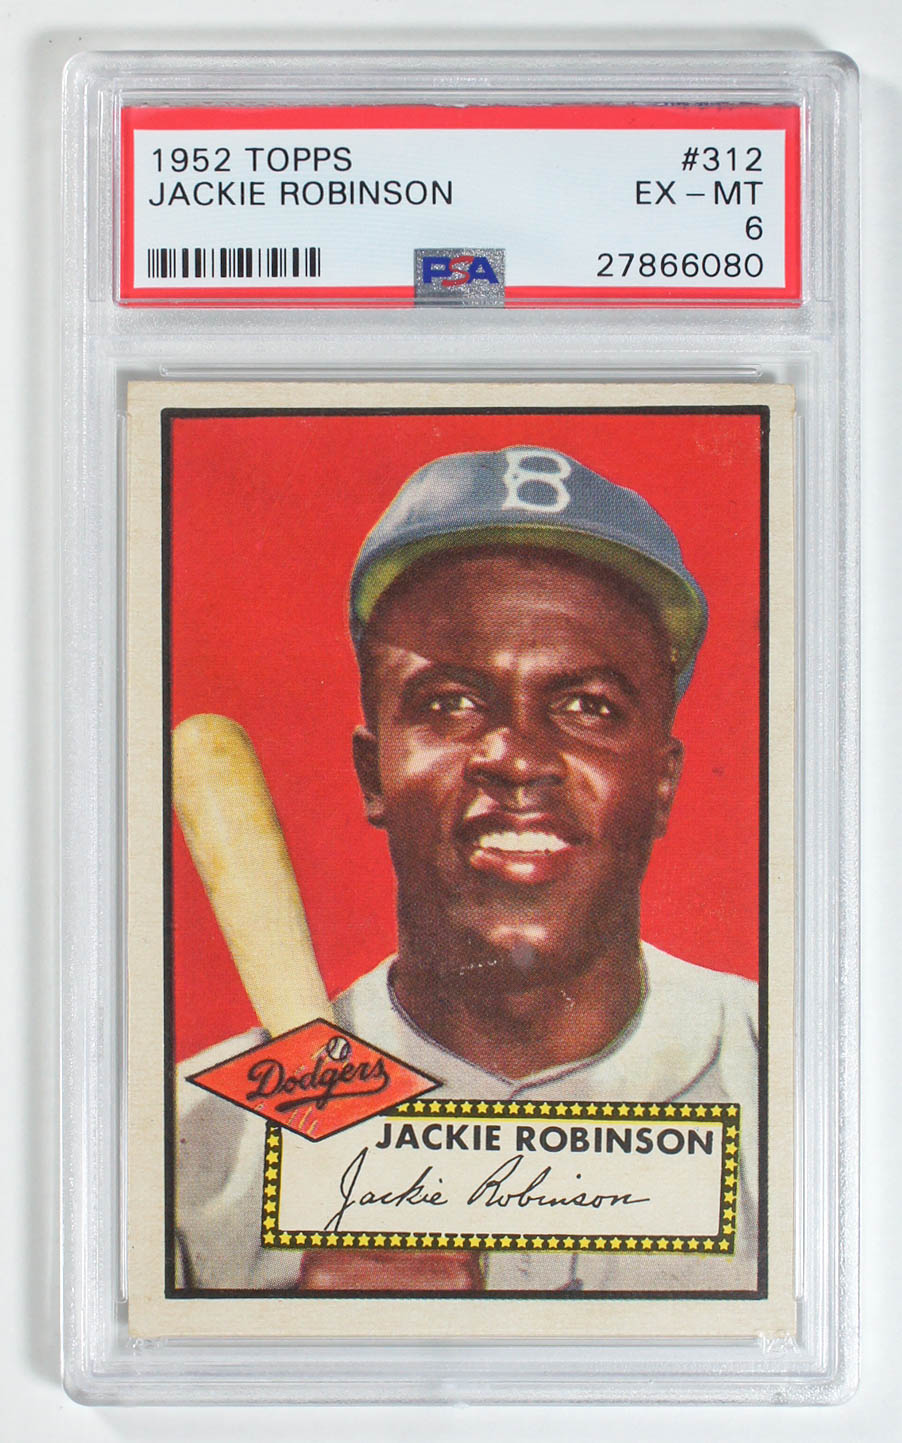 1952 Topps Jackie Robinson Number 312 PSA 6 Ex-Mt